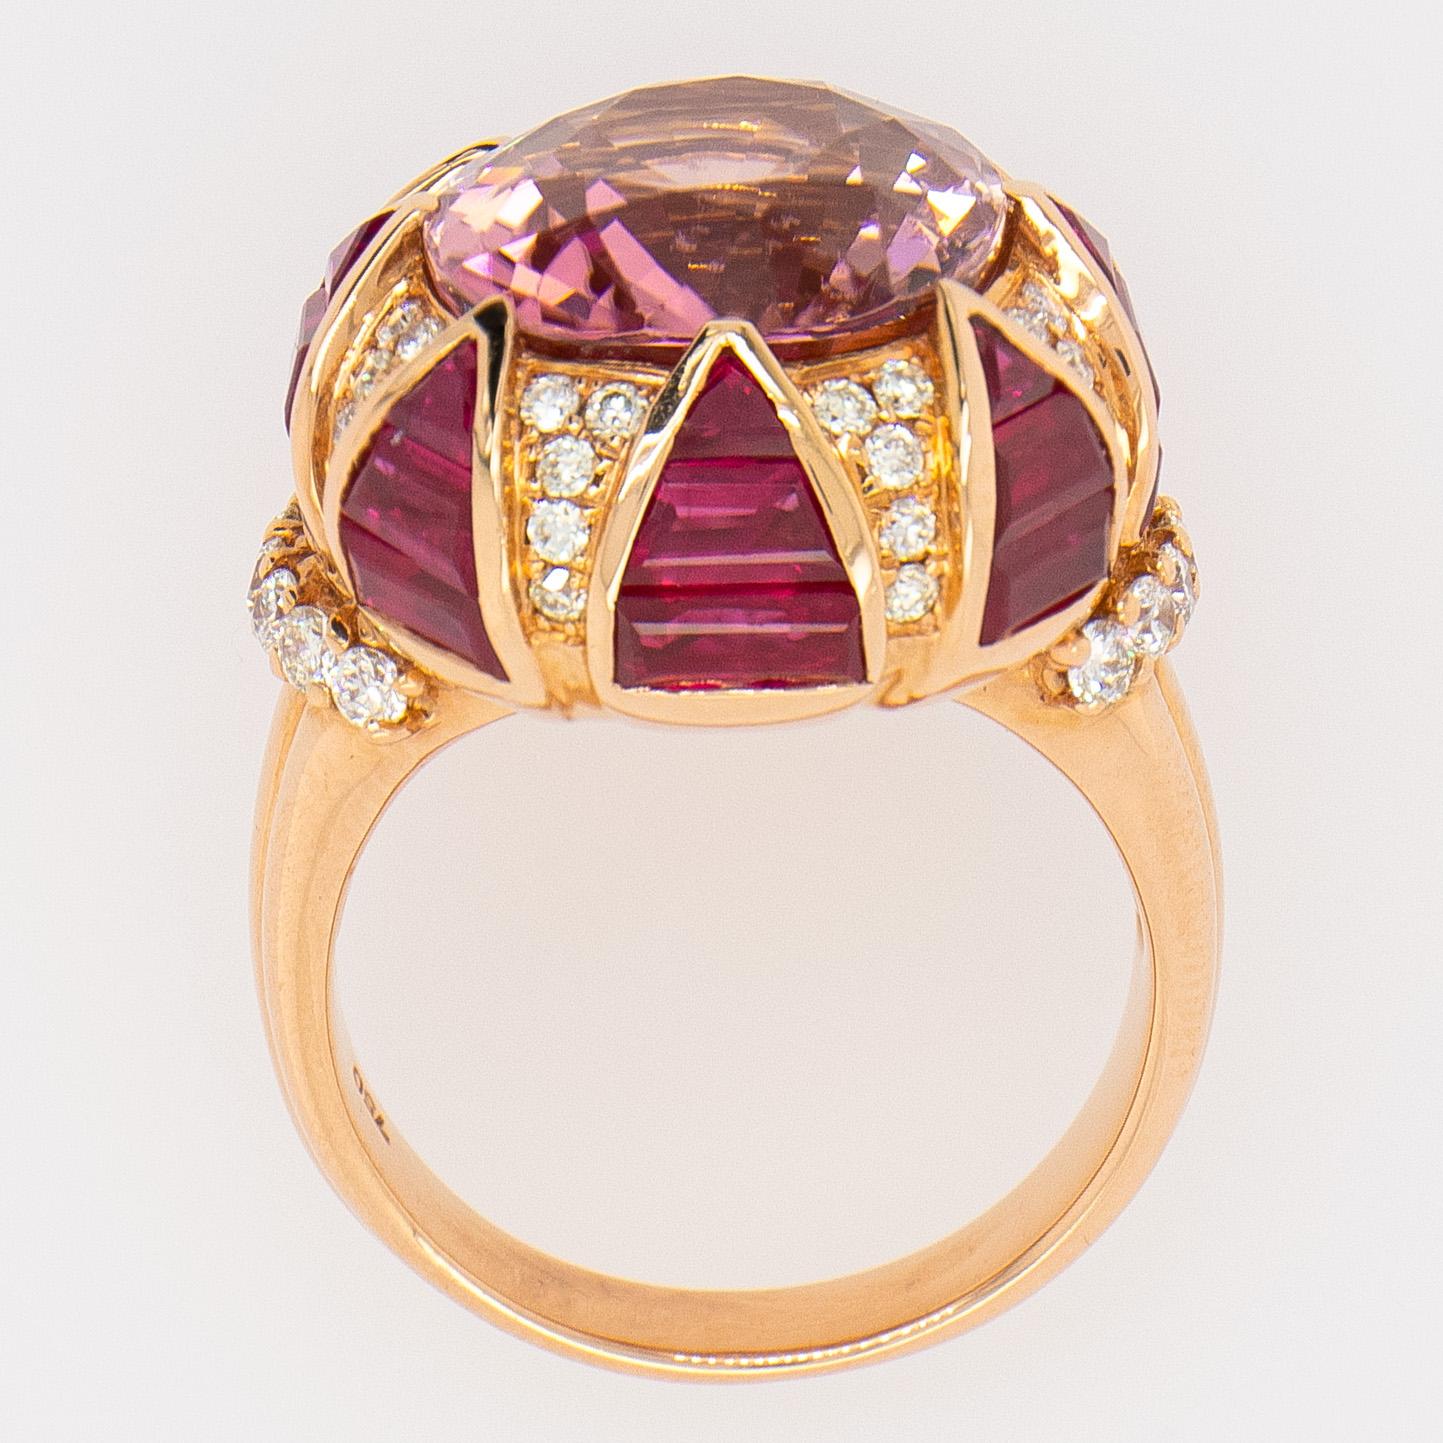 Cocktail 10 Carat Topaz Ring Set with Rubies and Diamonds 18k Yellow Gold In Excellent Condition For Sale In Laguna Niguel, CA